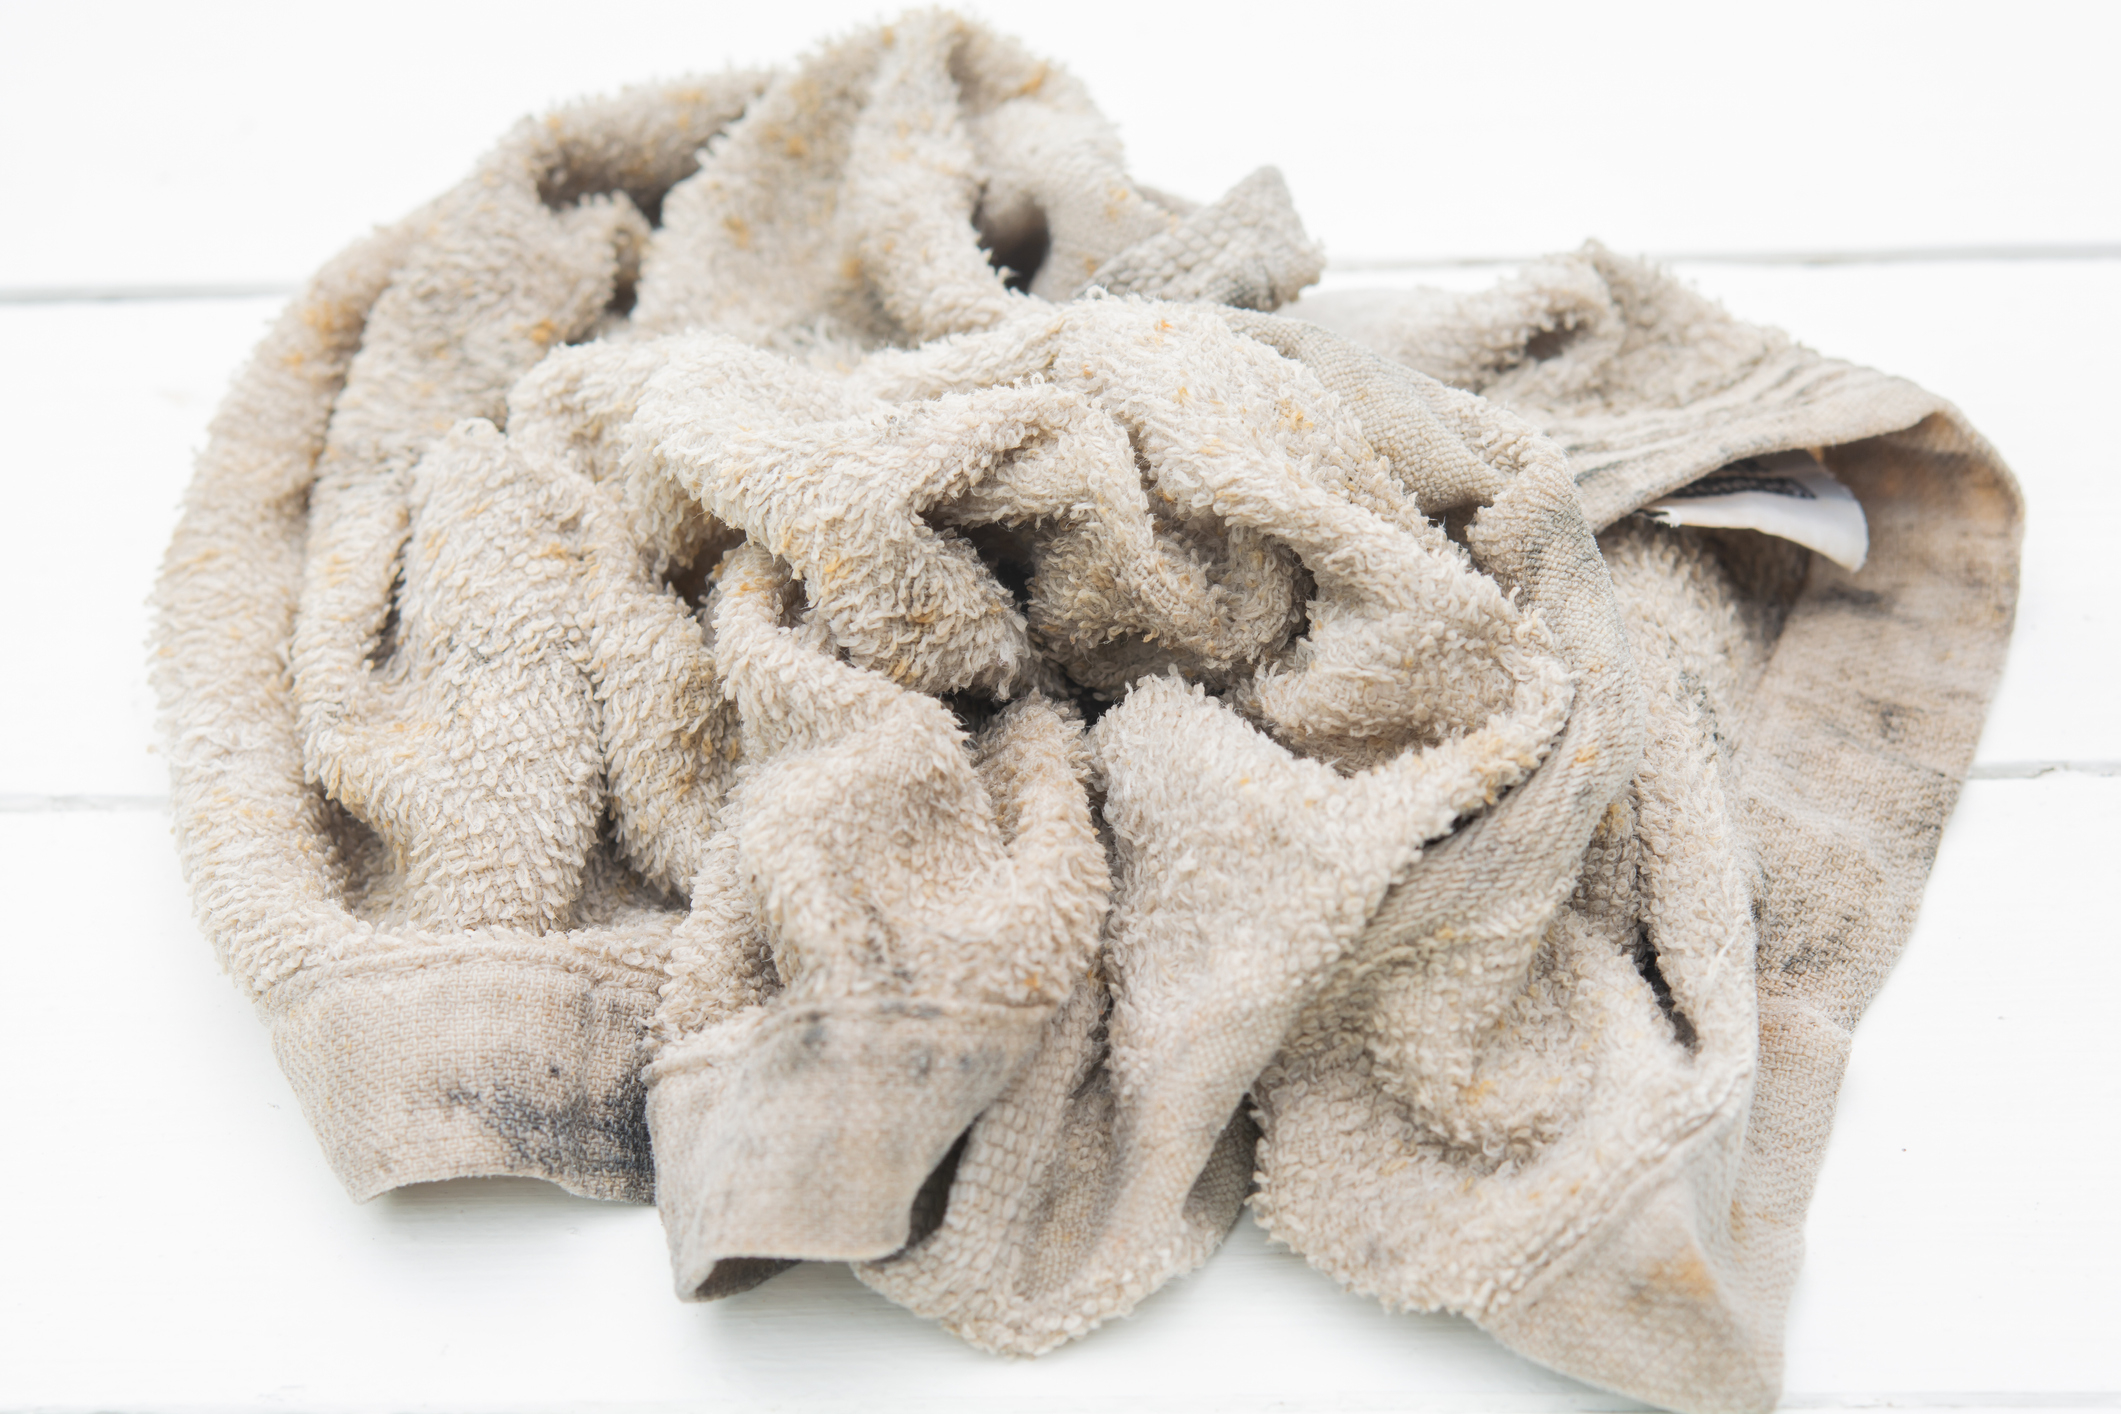 A crumpled, dirty towel on a white wooden surface